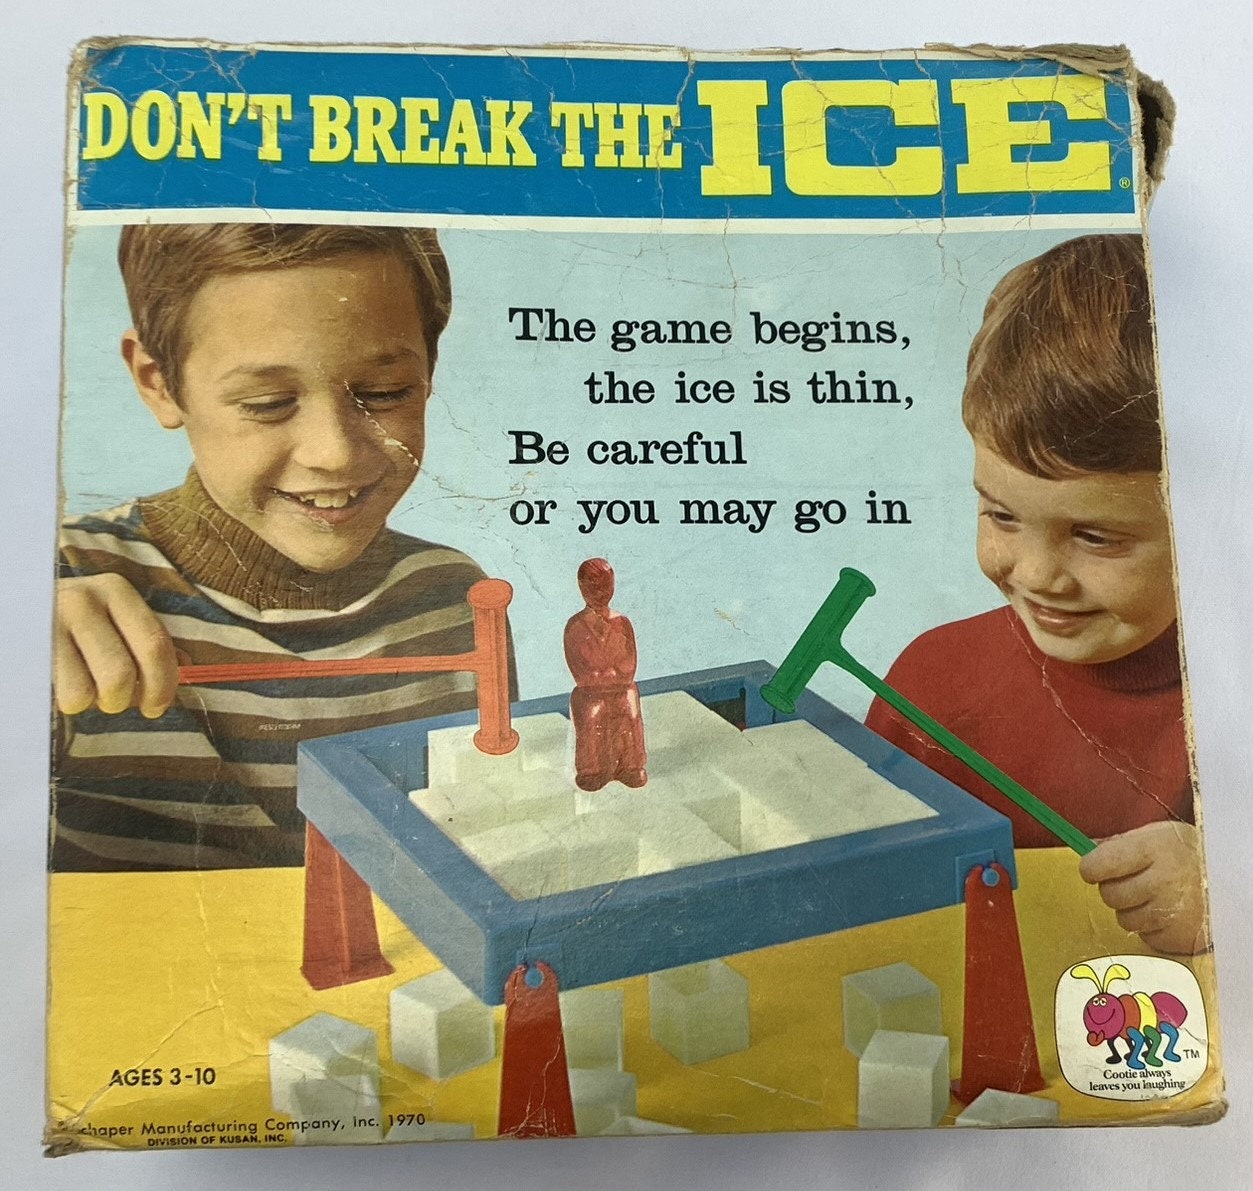 1969 Don't Break the Ice Game by Schaper in Good Condition FREE SHIPPING 